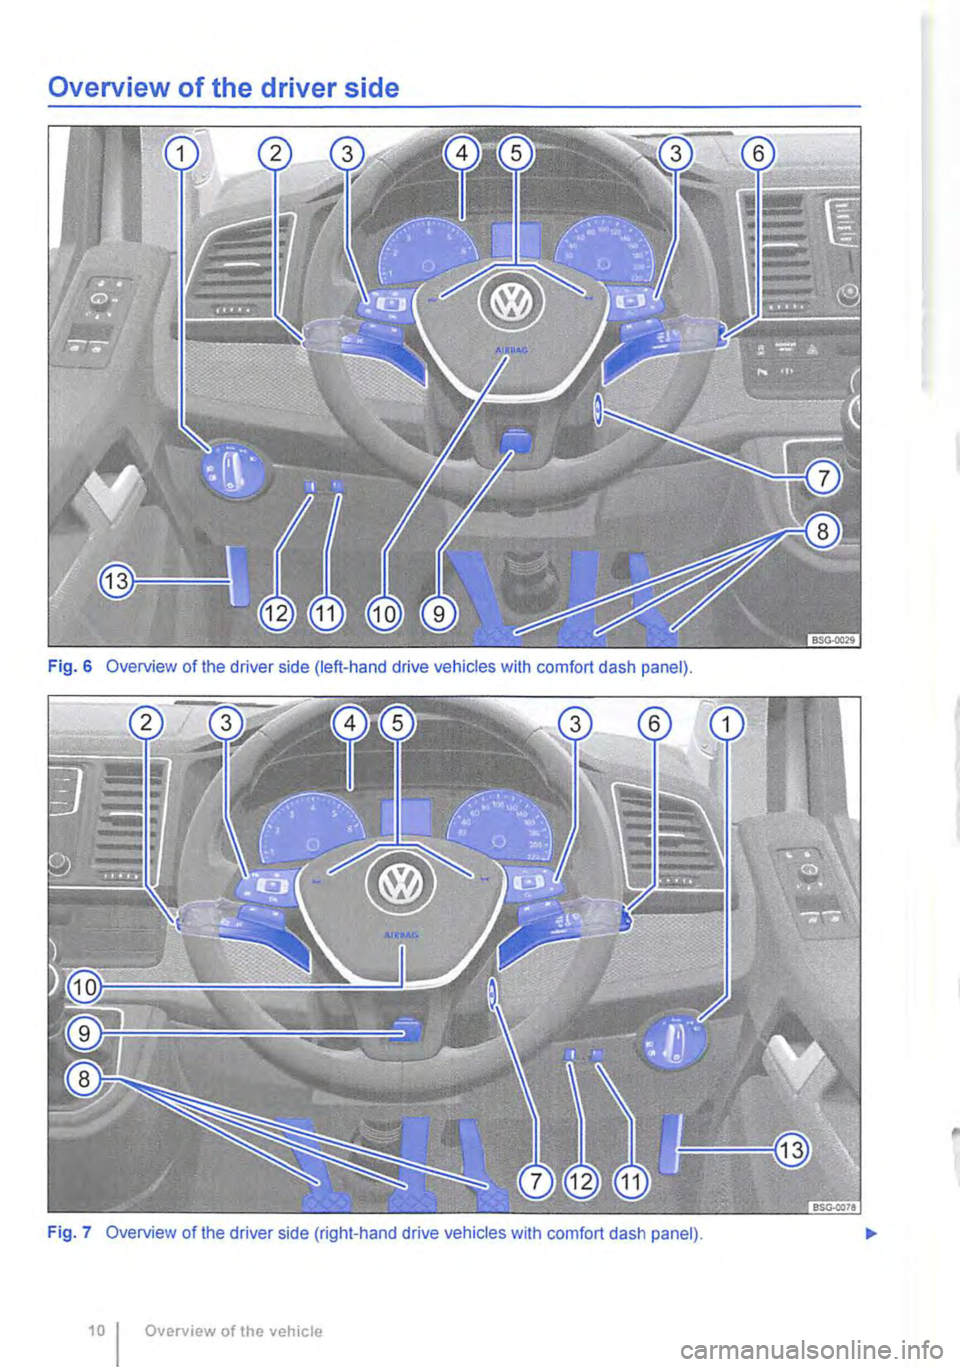 VOLKSWAGEN TRANSPORTER 2016  Owners Manual Overview of the driver side 
Fig. 6 Overview of the driver side (left-hand drive vehicles with comfort dash panel). 
Fig. 7 Overview of the driver side (right-hand drive vehicles with comfort dash pan